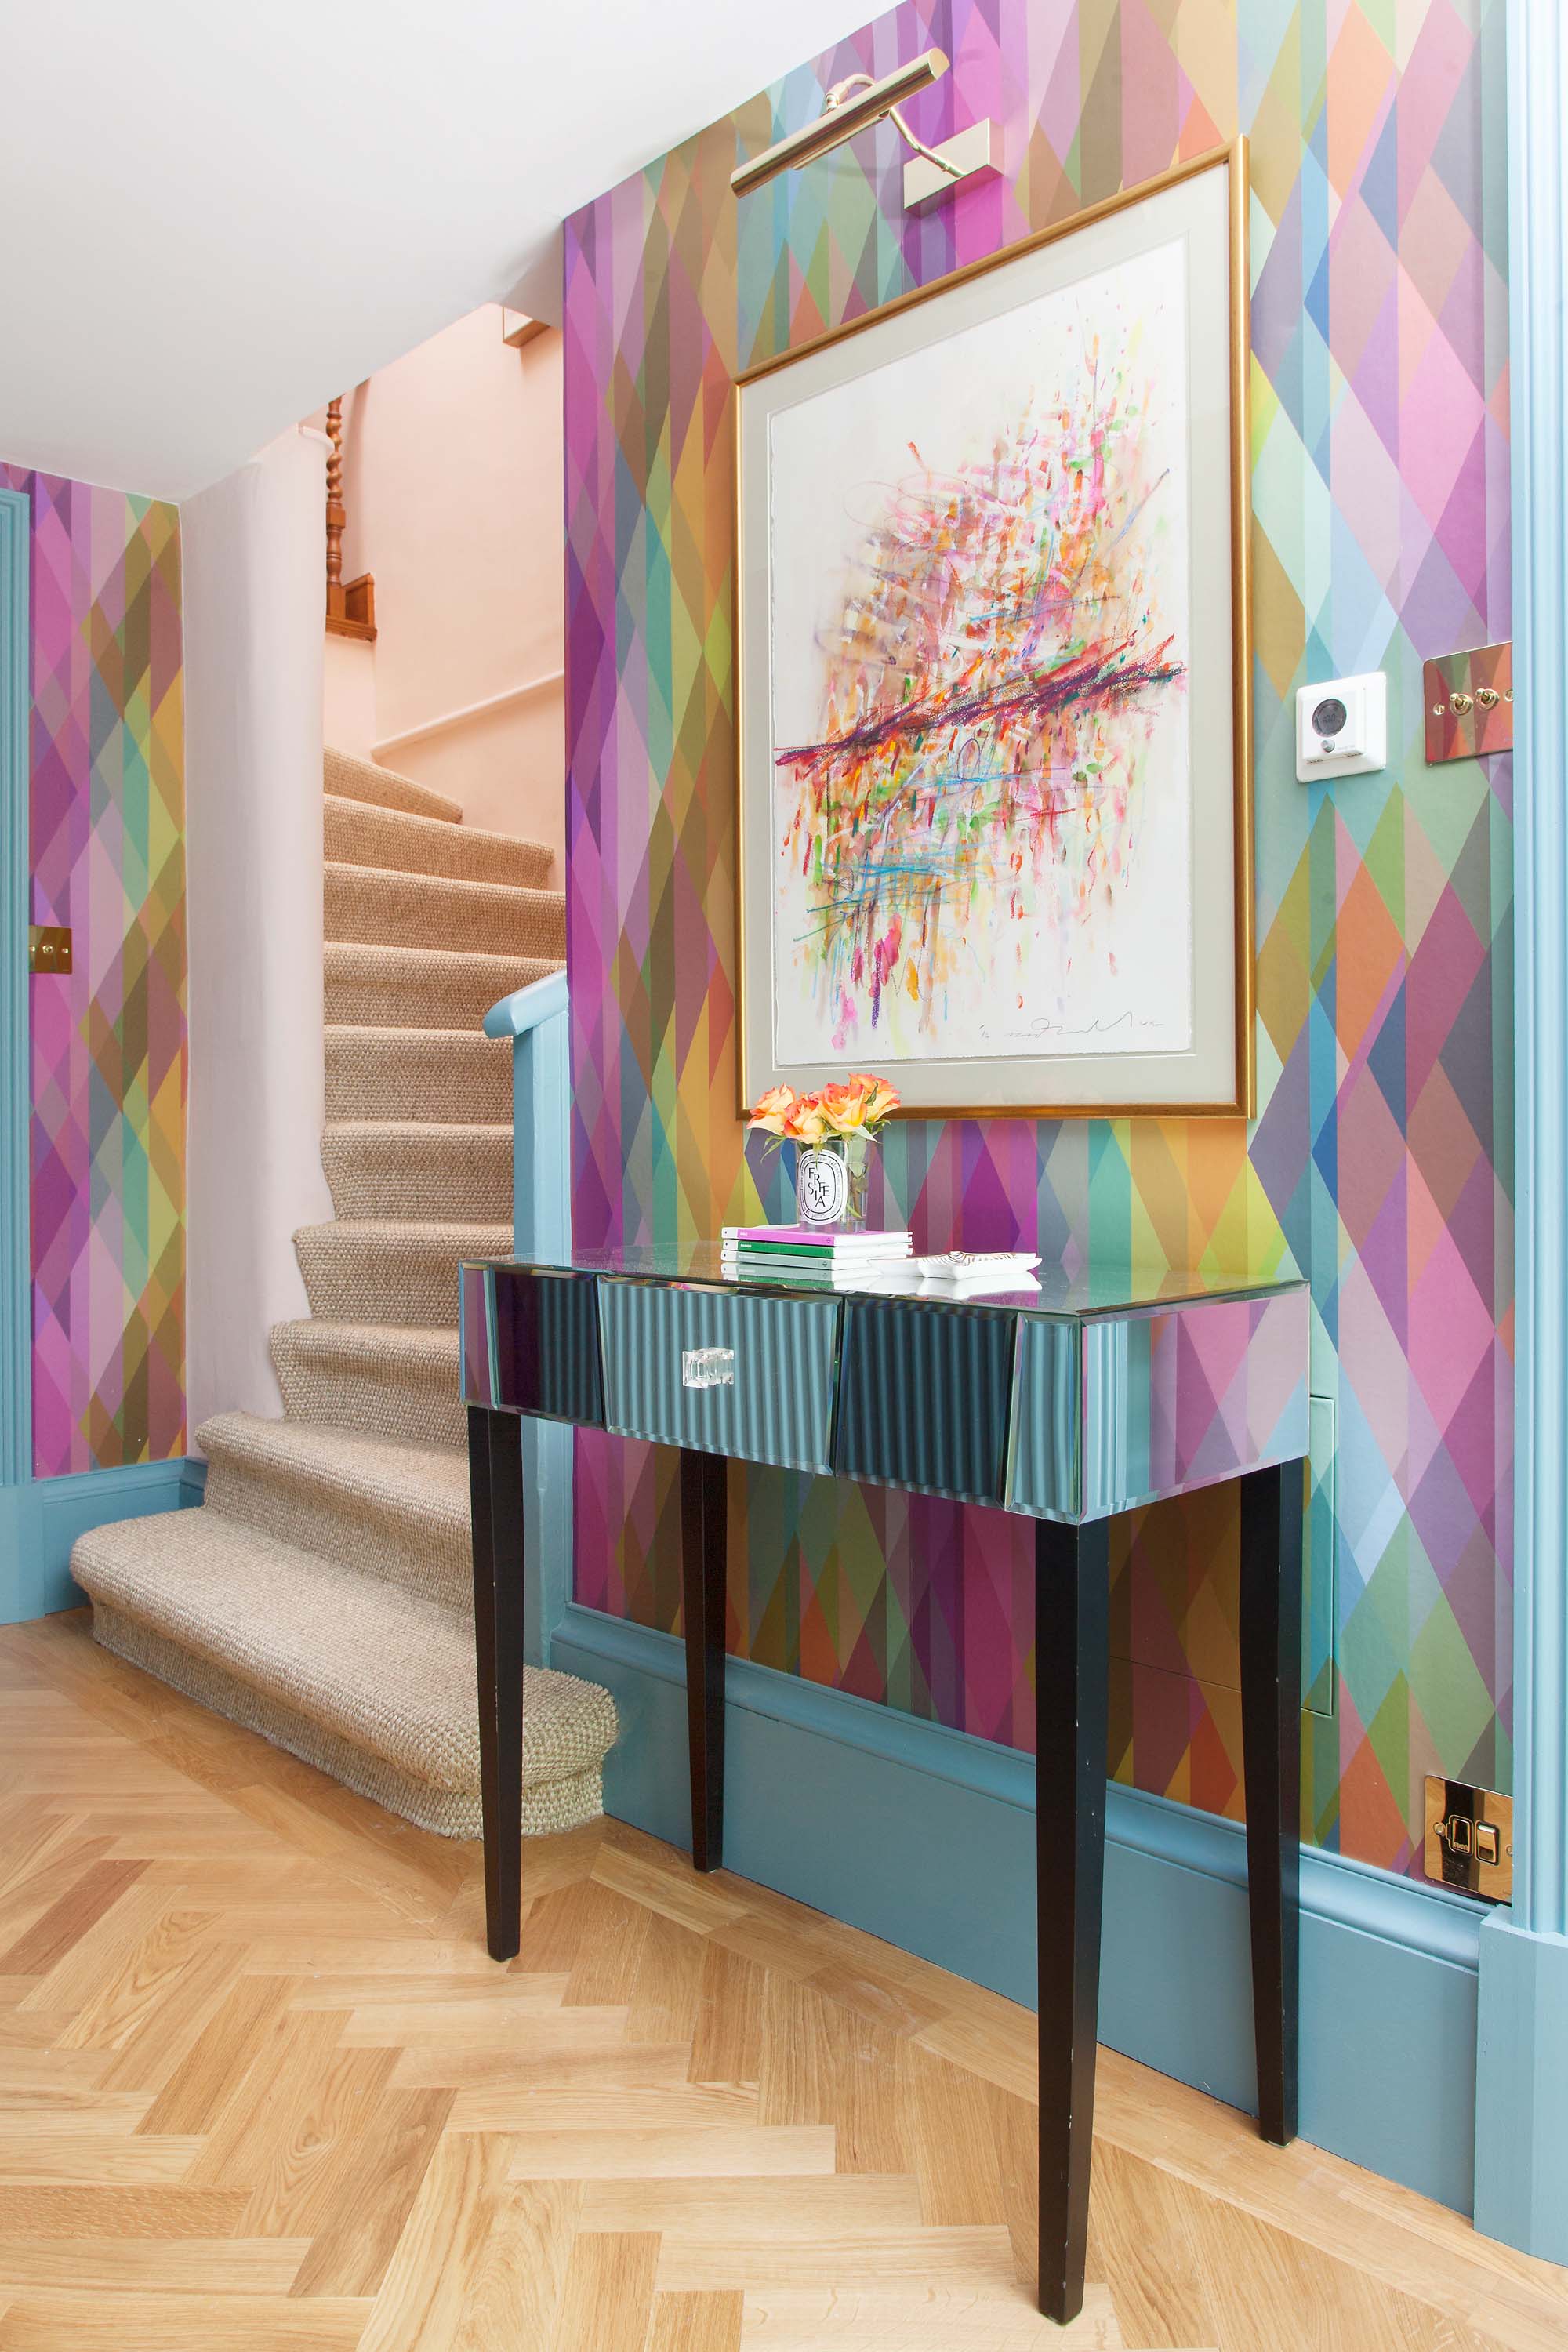 Should I paint my hallway beige for a quick sale?/Photo: Susie Lowe